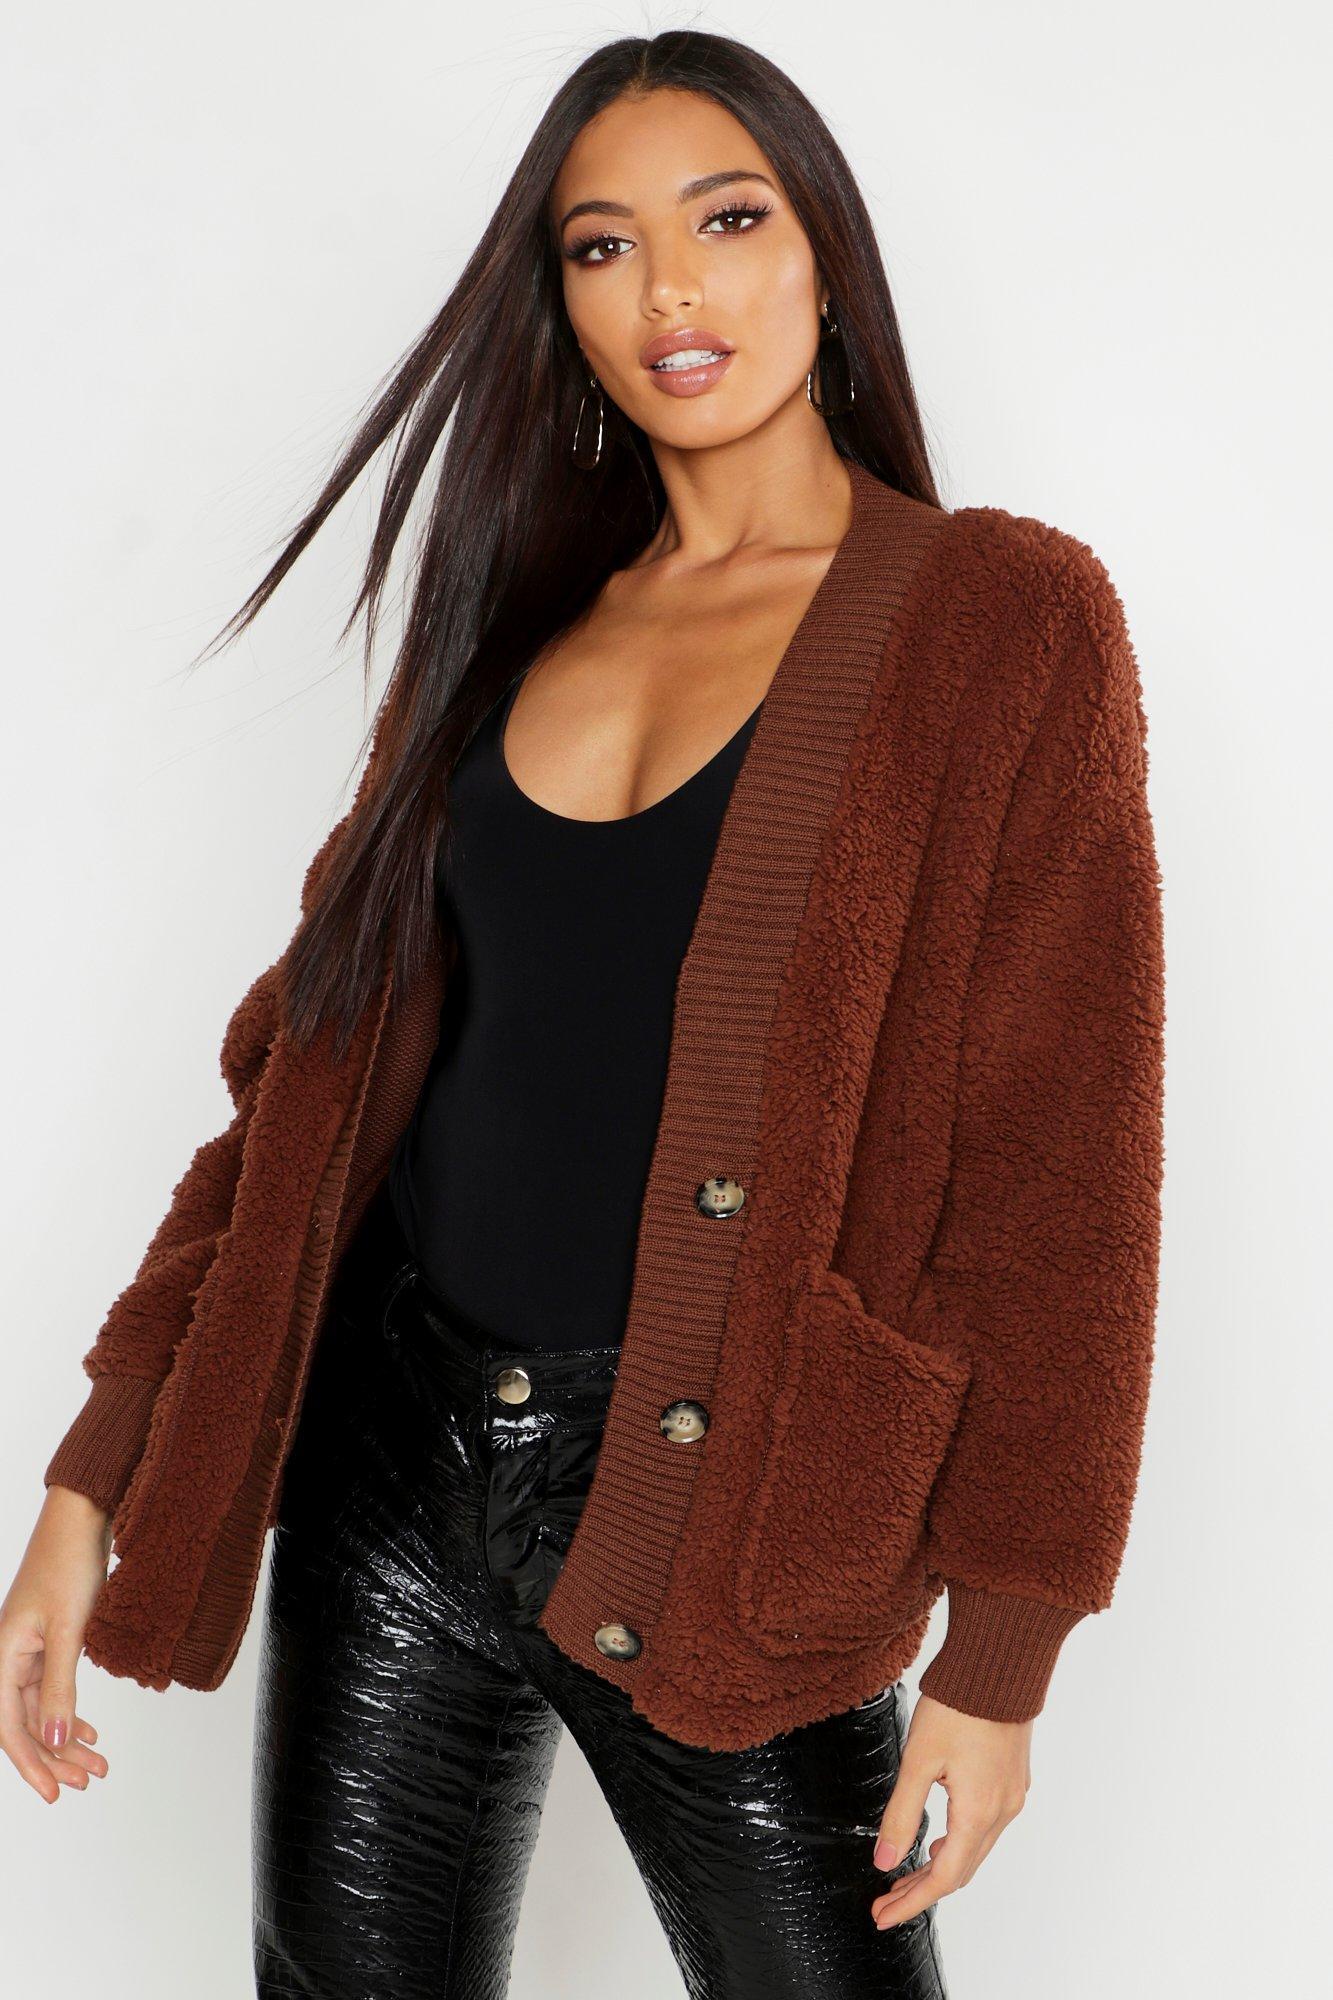 Lyst - Boohoo Knitted Borg Cardigan With Rib Trim in Brown